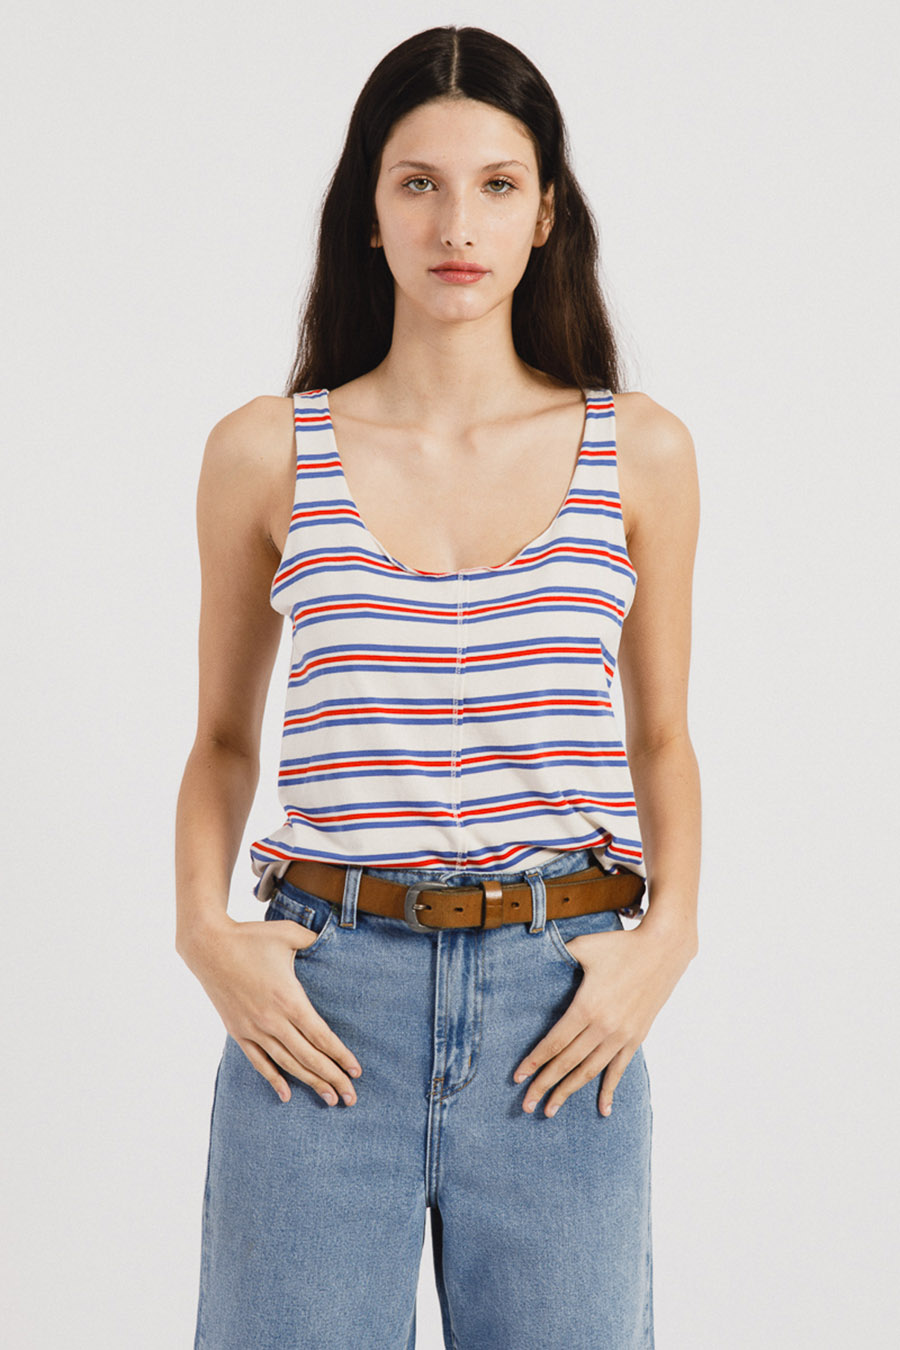 Musculosa Kate Stripes New 